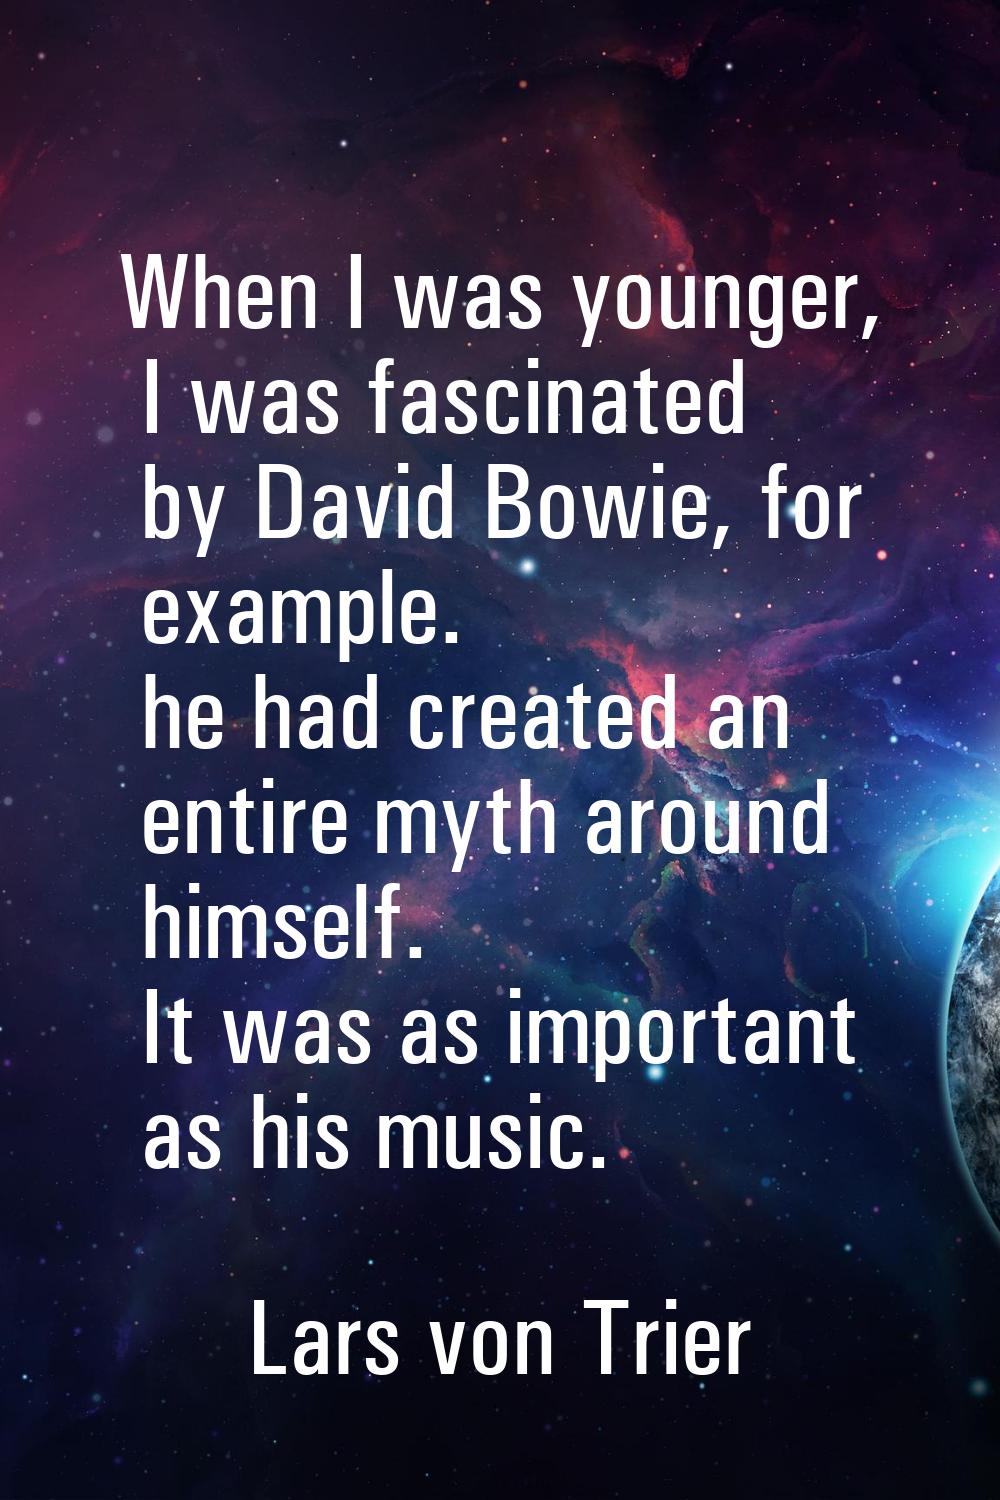 When I was younger, I was fascinated by David Bowie, for example. he had created an entire myth aro